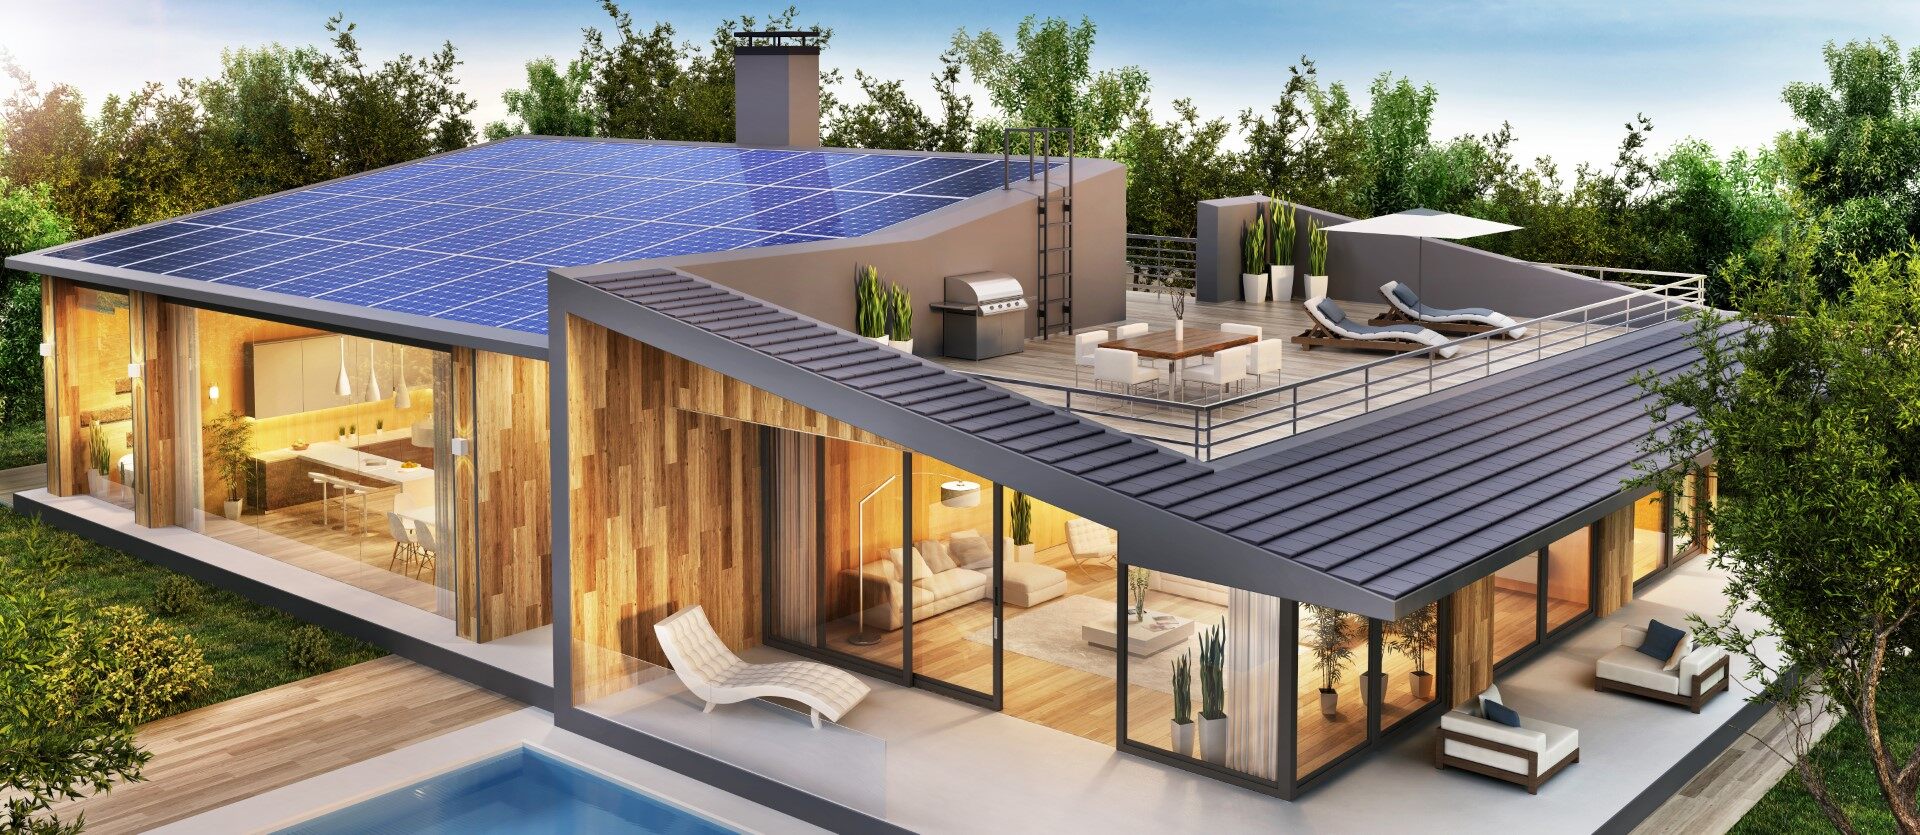 Creating a Sustainable Home: Eco-Friendly Design Ideas